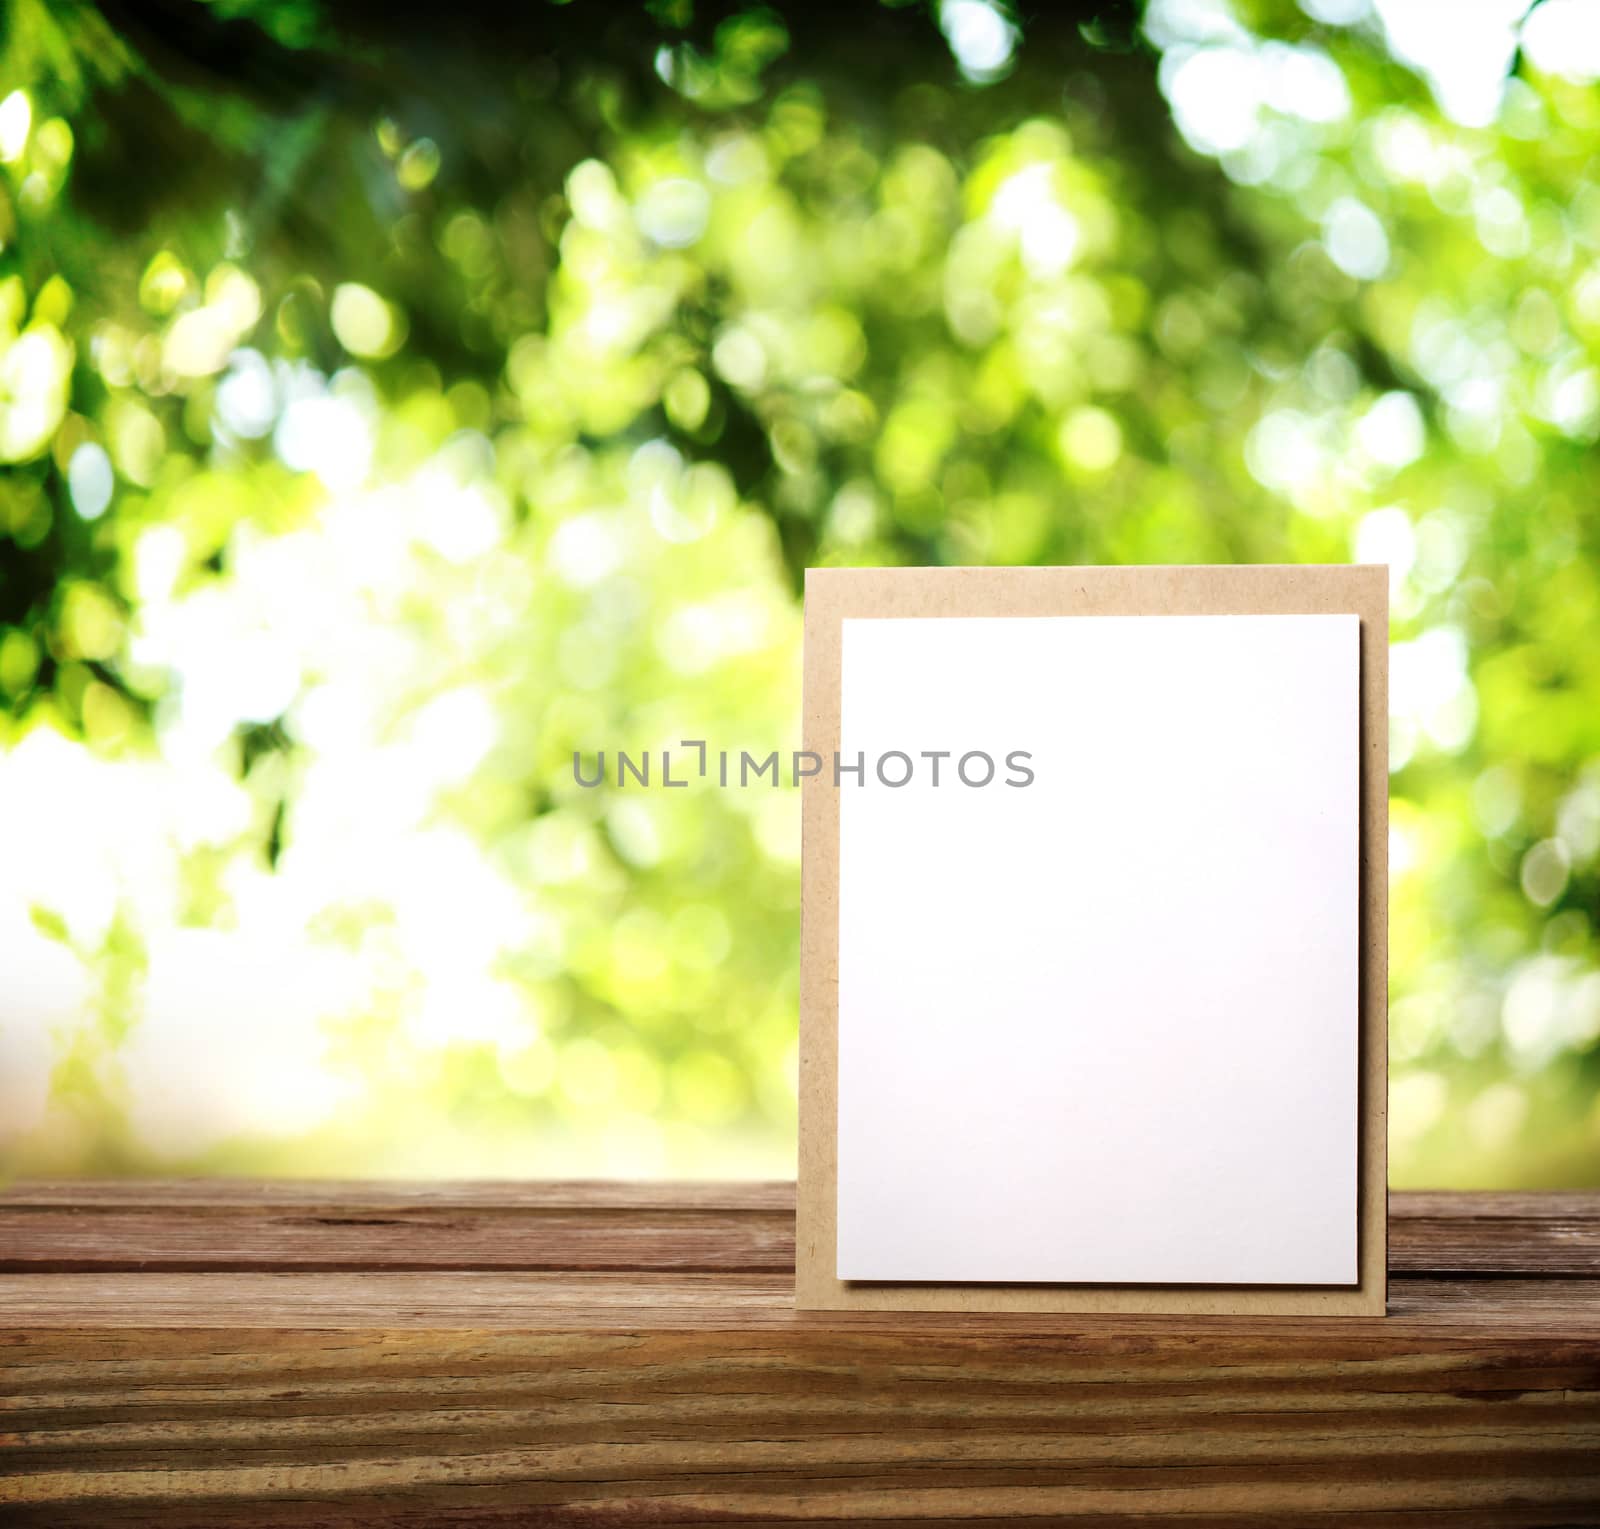 Greeting card on the wooden table over green tree leaves